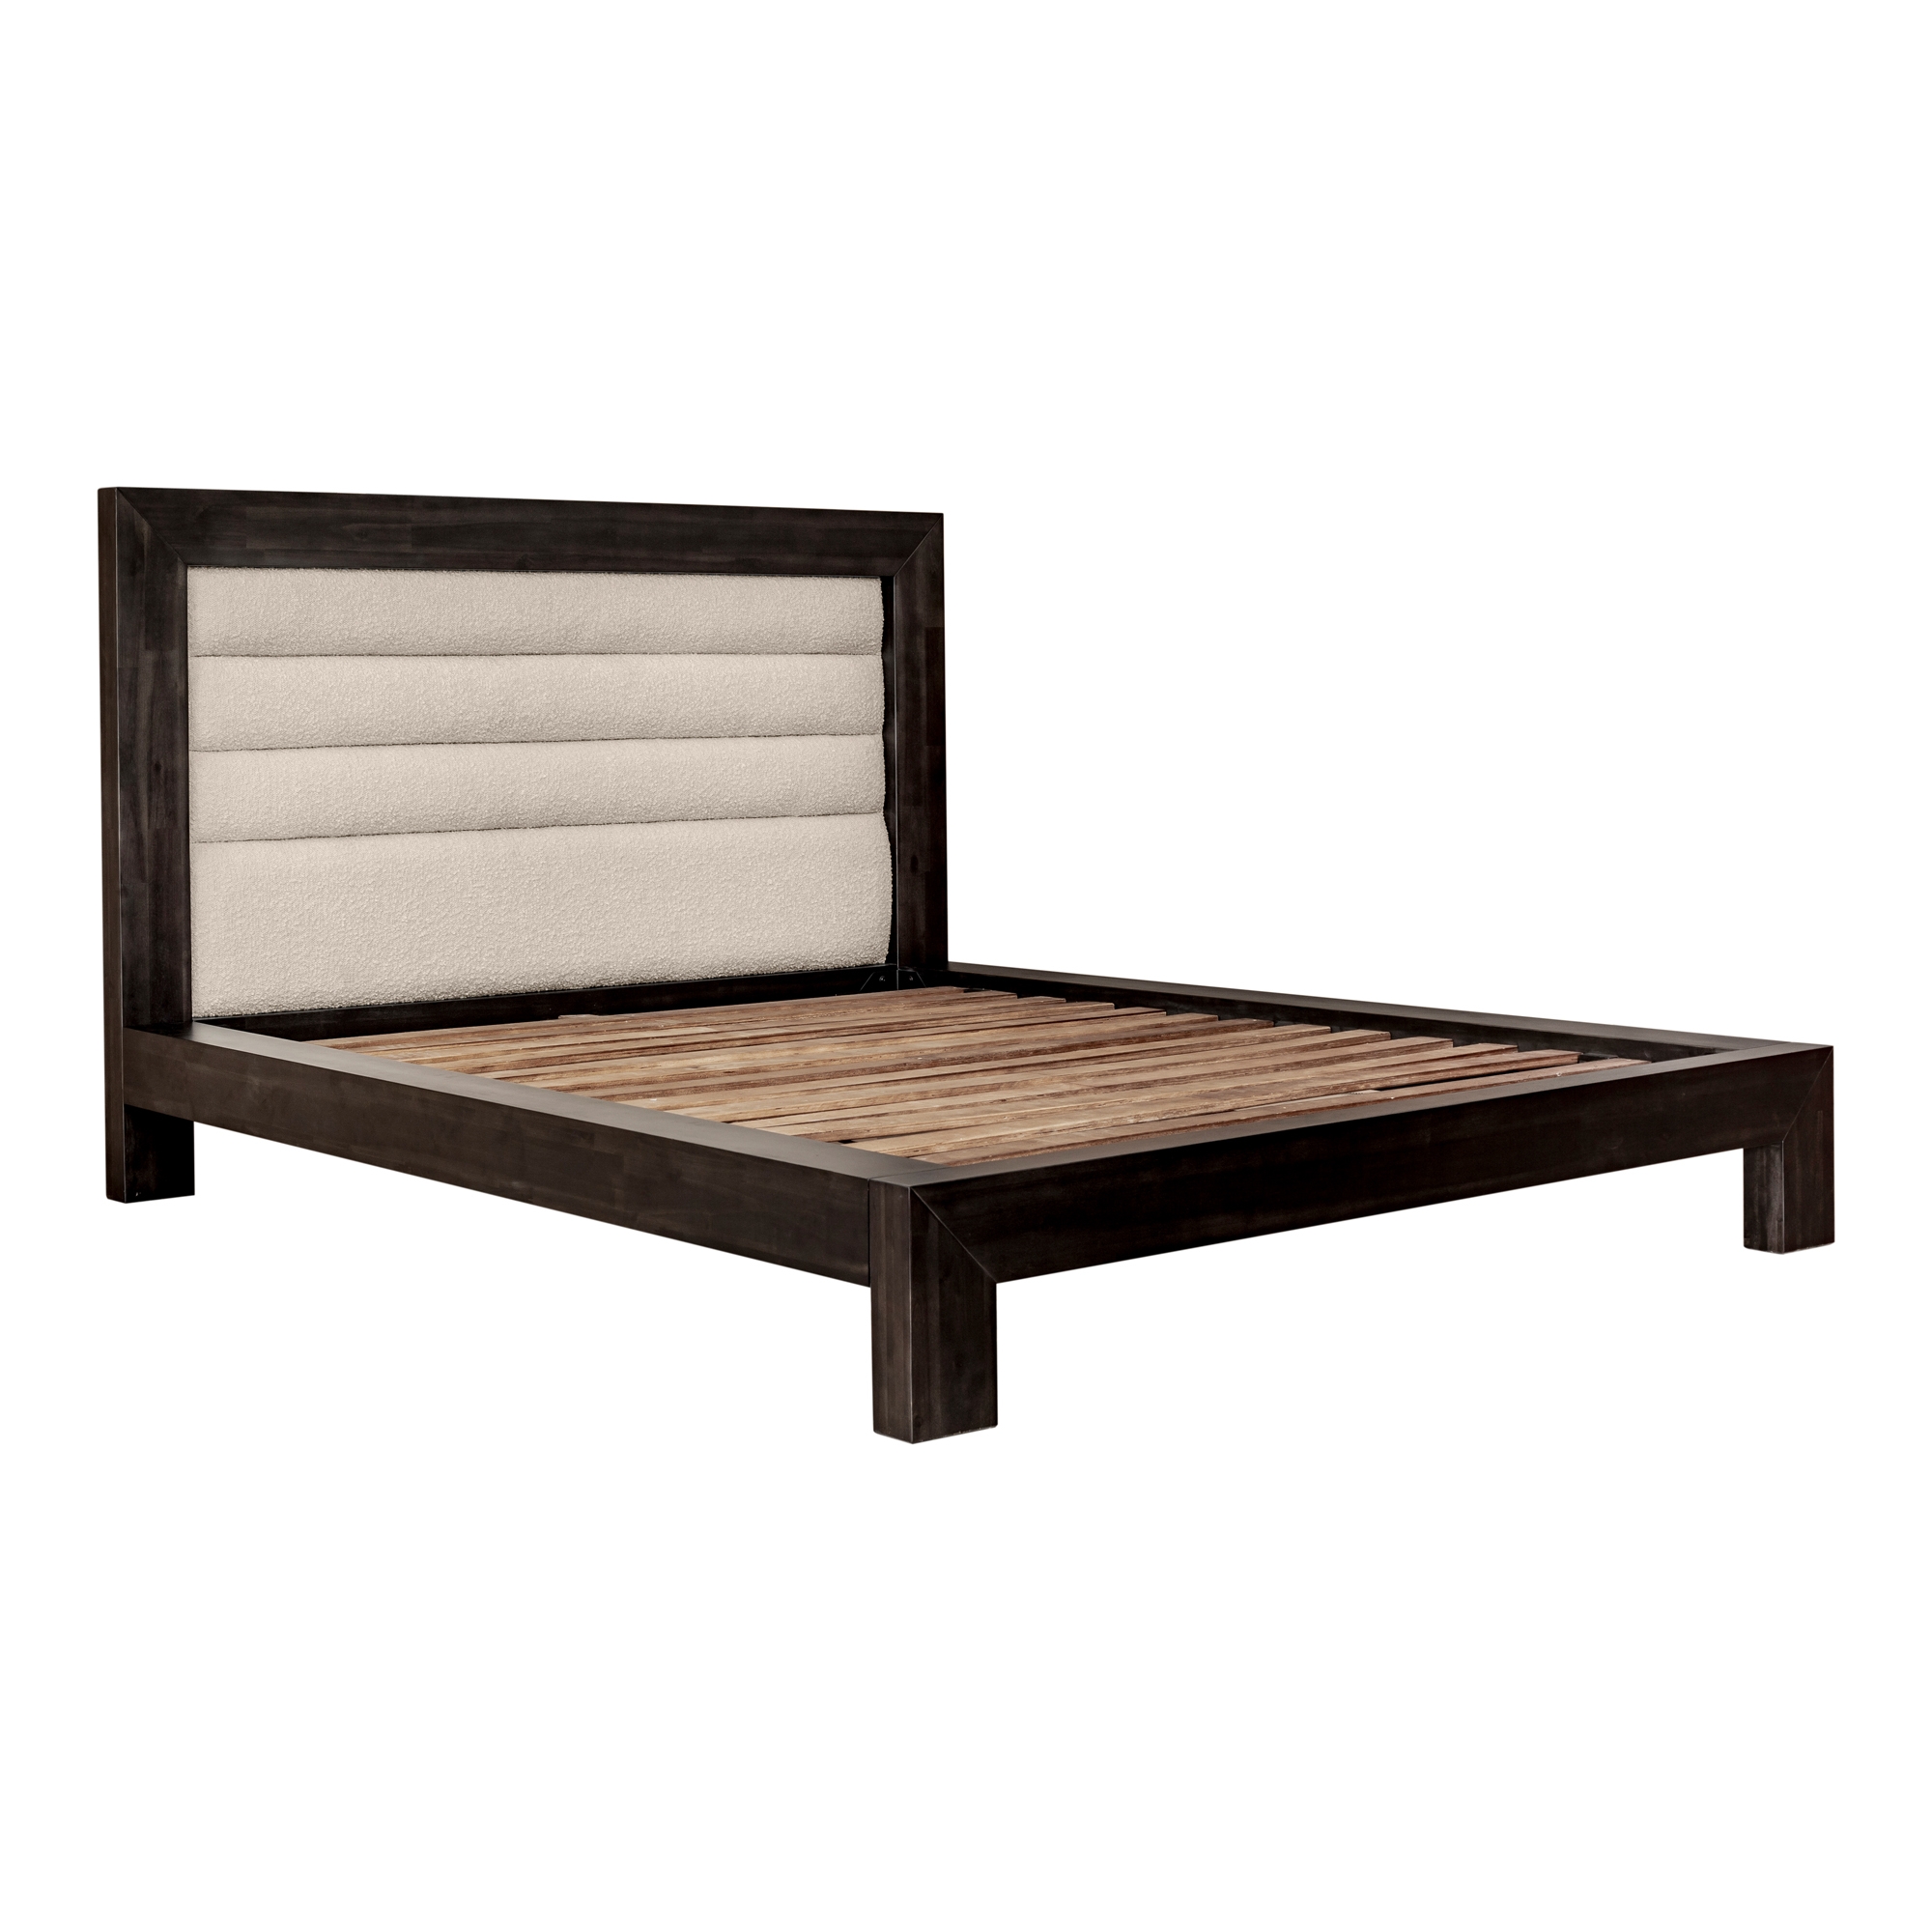 Ashcroft Queen Bed - Image 1